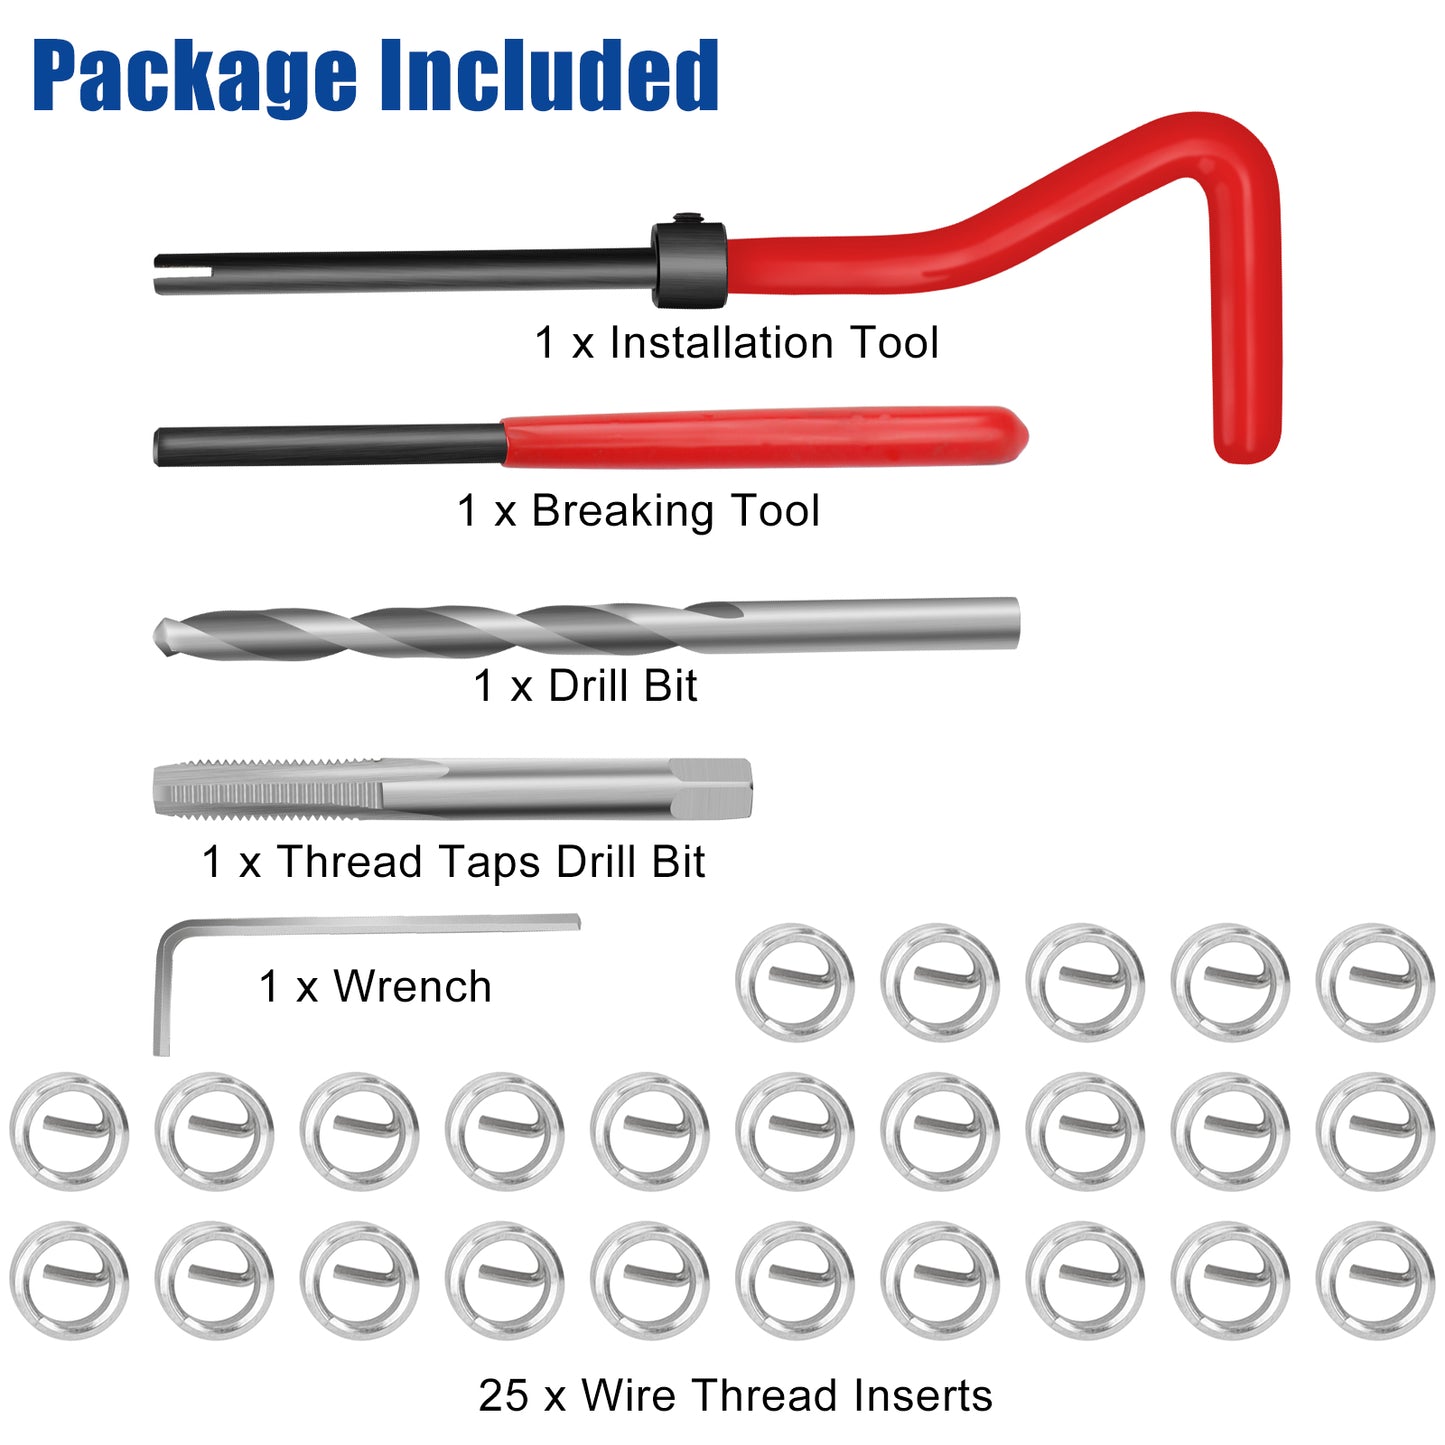 Automotive Thread Repair Kit - All-in-One M6 x 1mm Thread Inserts, Tap, Drill Bit, Installation Tool, and More